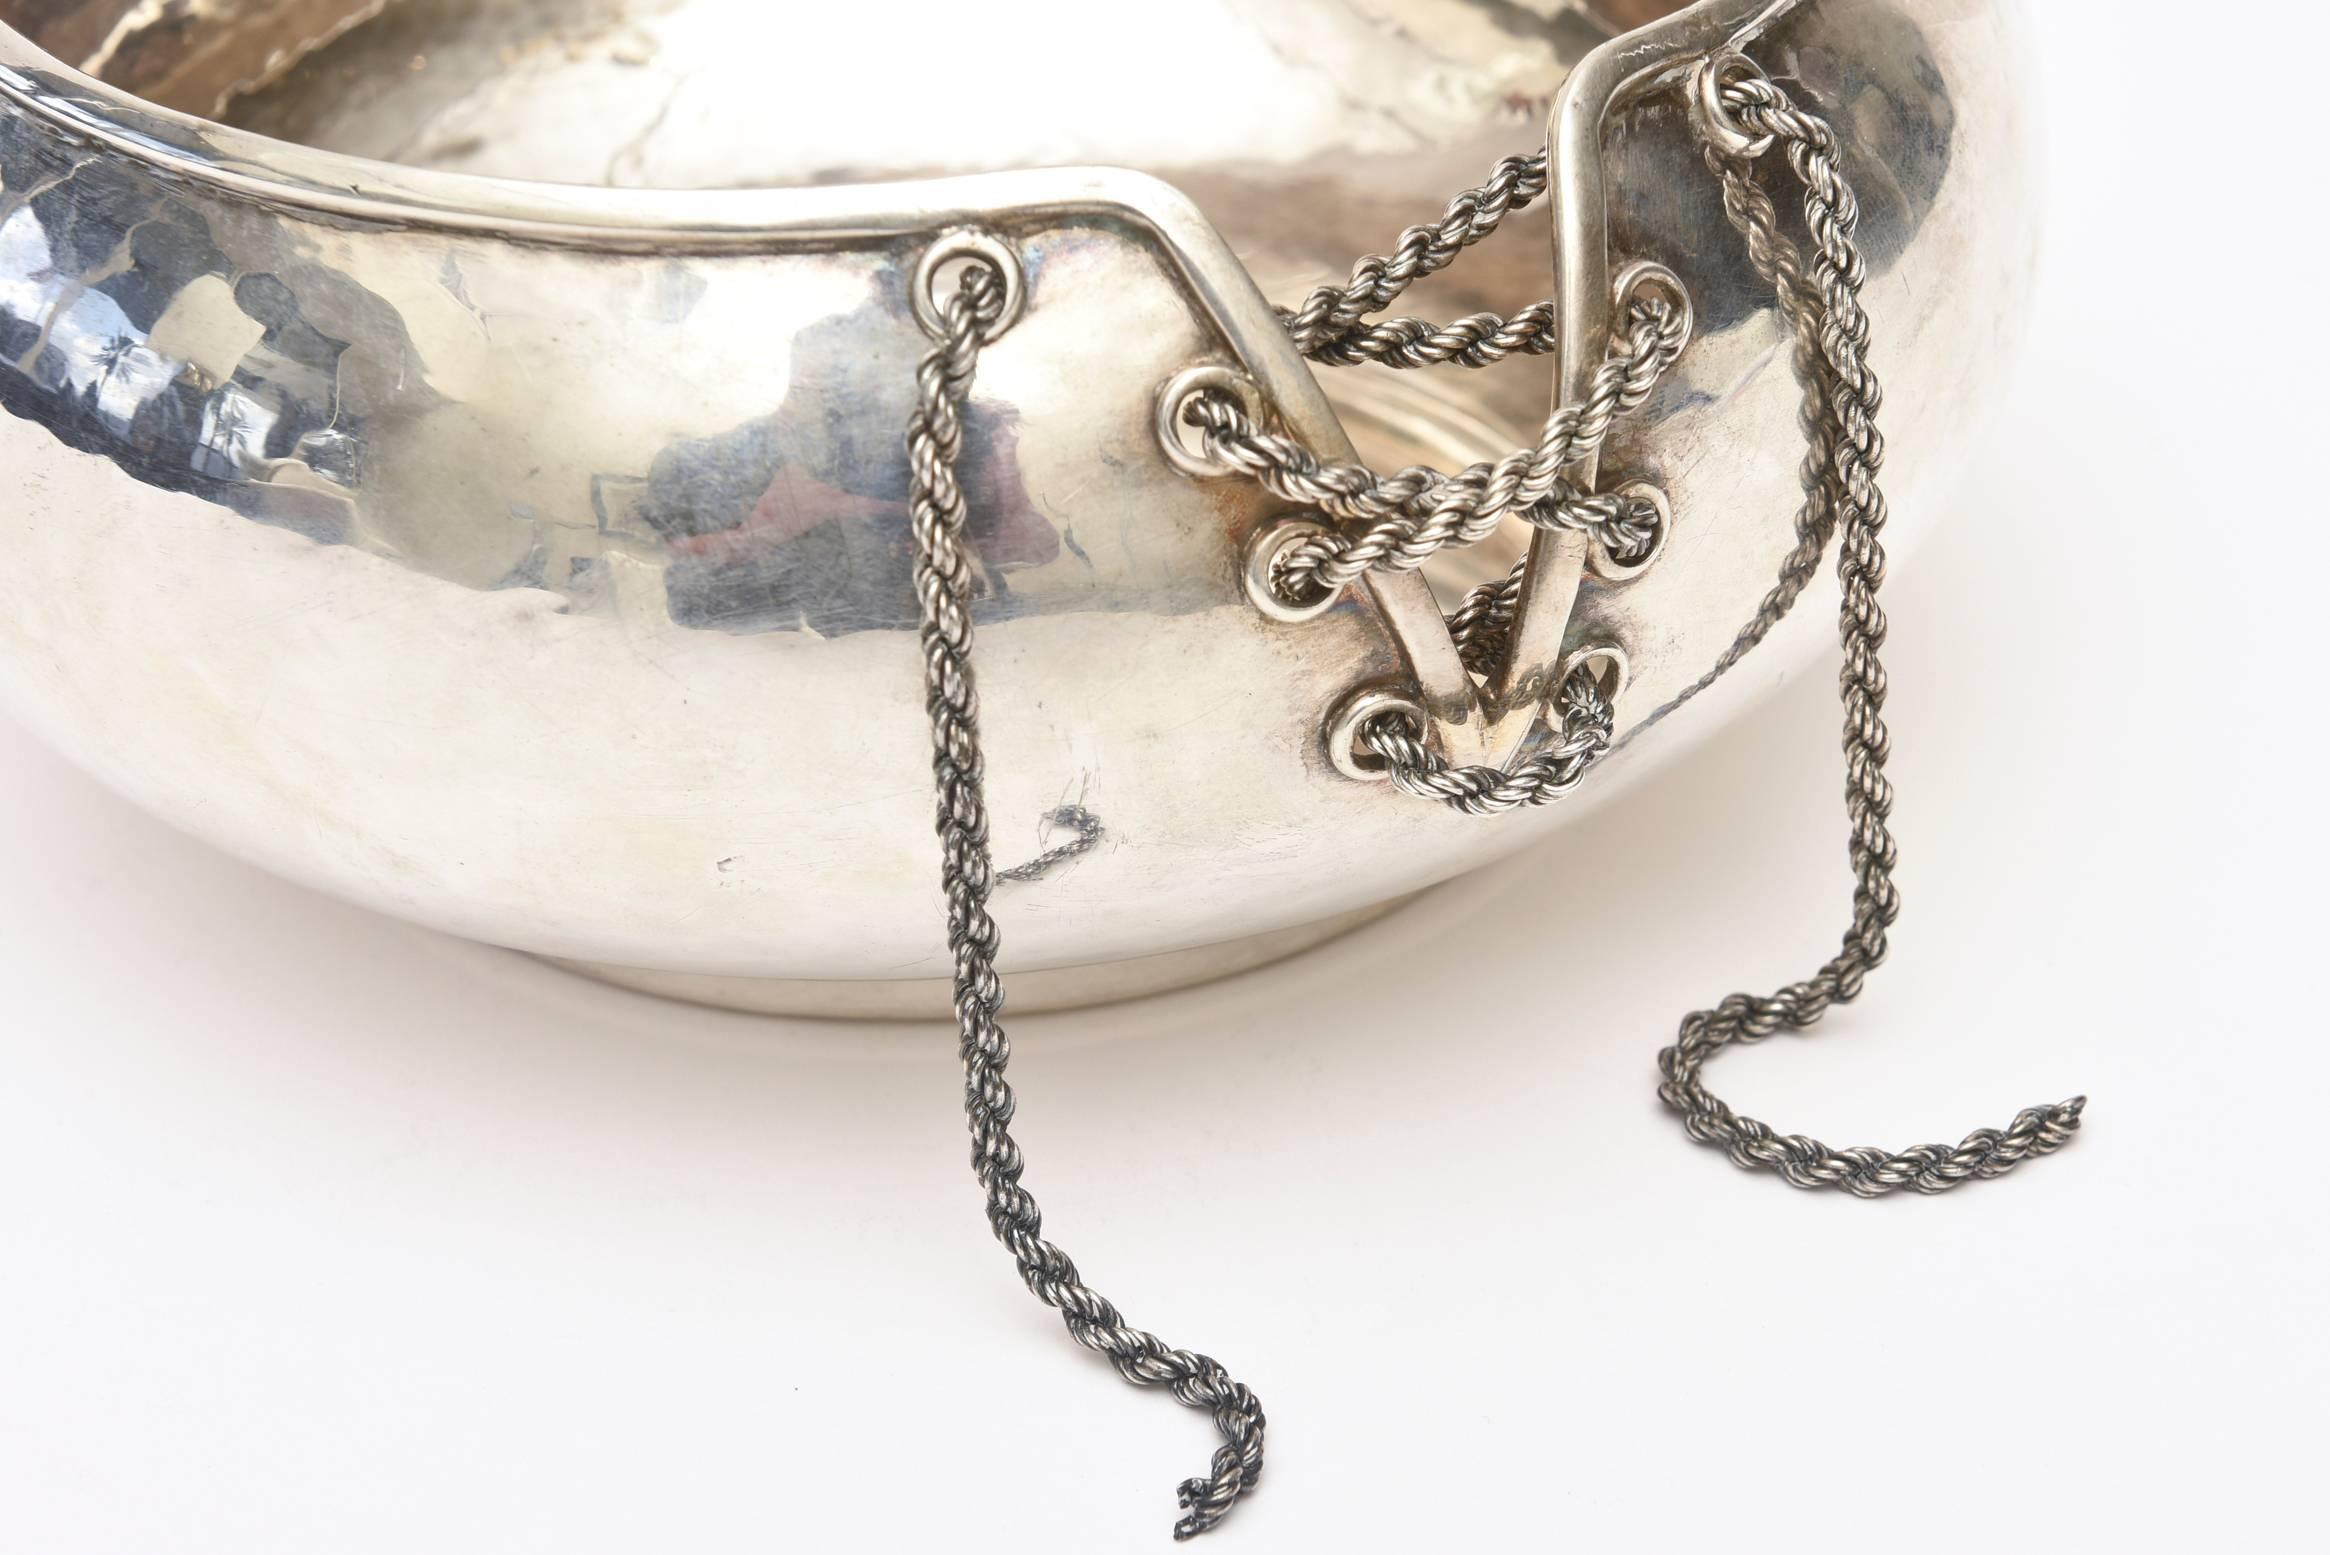 Modern Sterling Silver Lace Up Chain Bowl or Wine Caddy Italian Barware Vintage